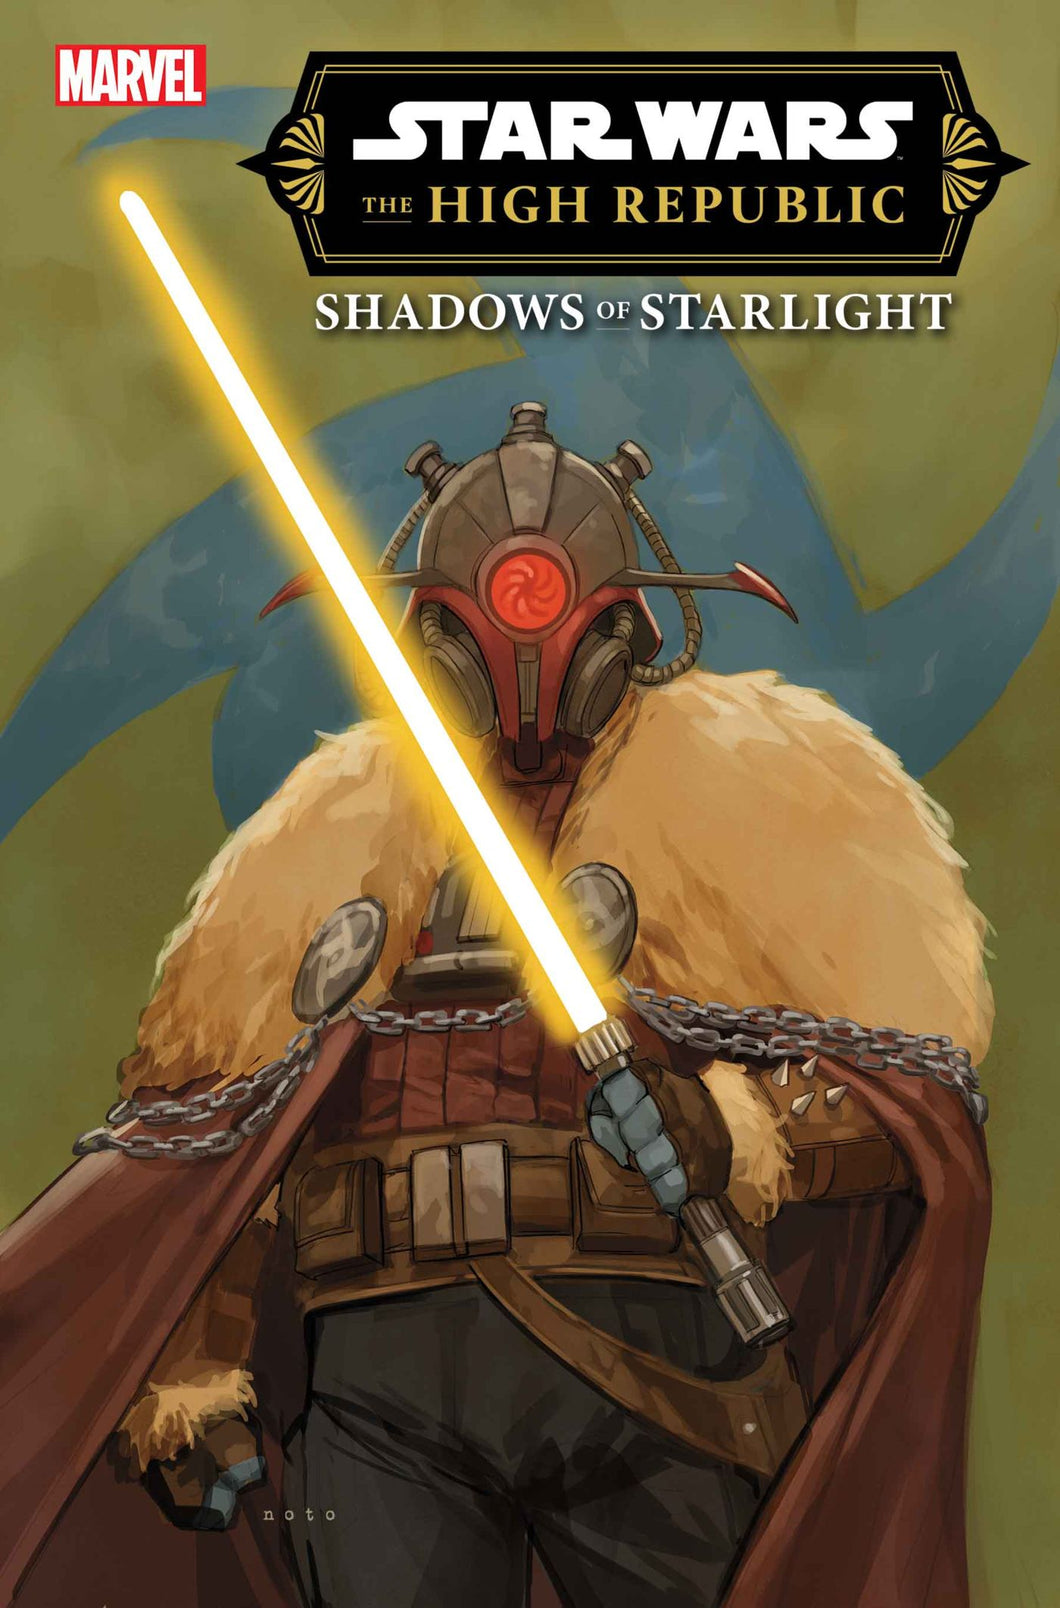 STAR WARS: THE HIGH REPUBLIC - SHADOWS OF STARLIGHT #4 (PHILL NOTO COVER)